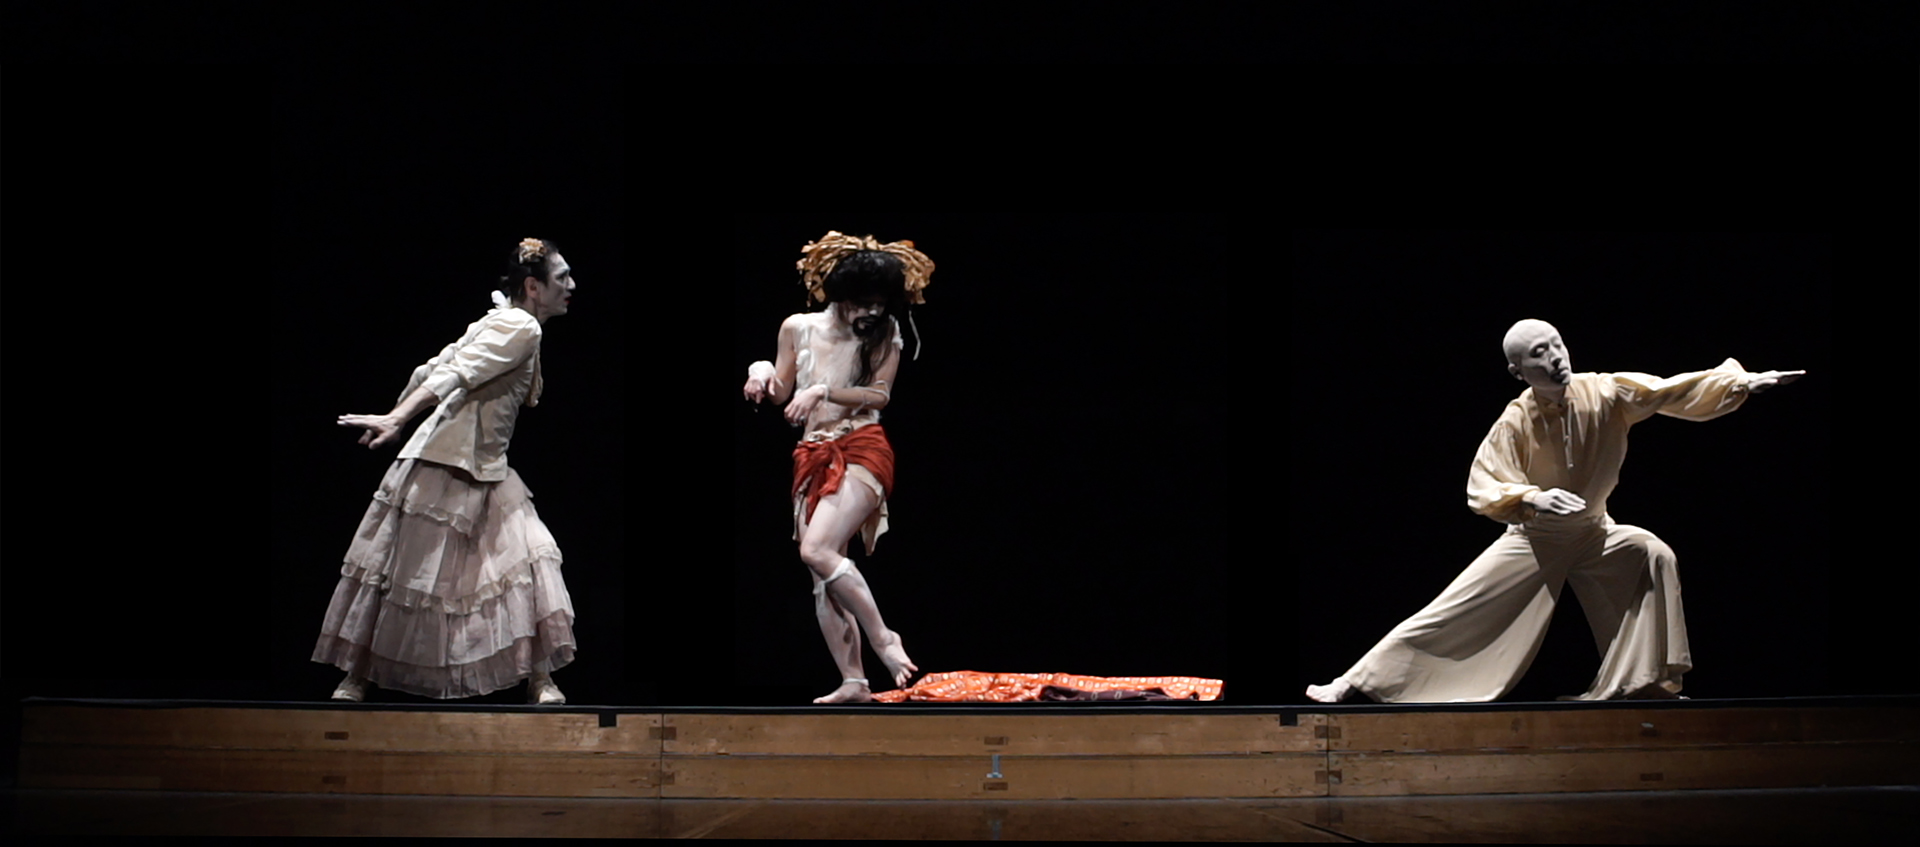 Three Butoh dancers are shown on a stage from a distance against a black background. Their skin is painted with white makeup. 